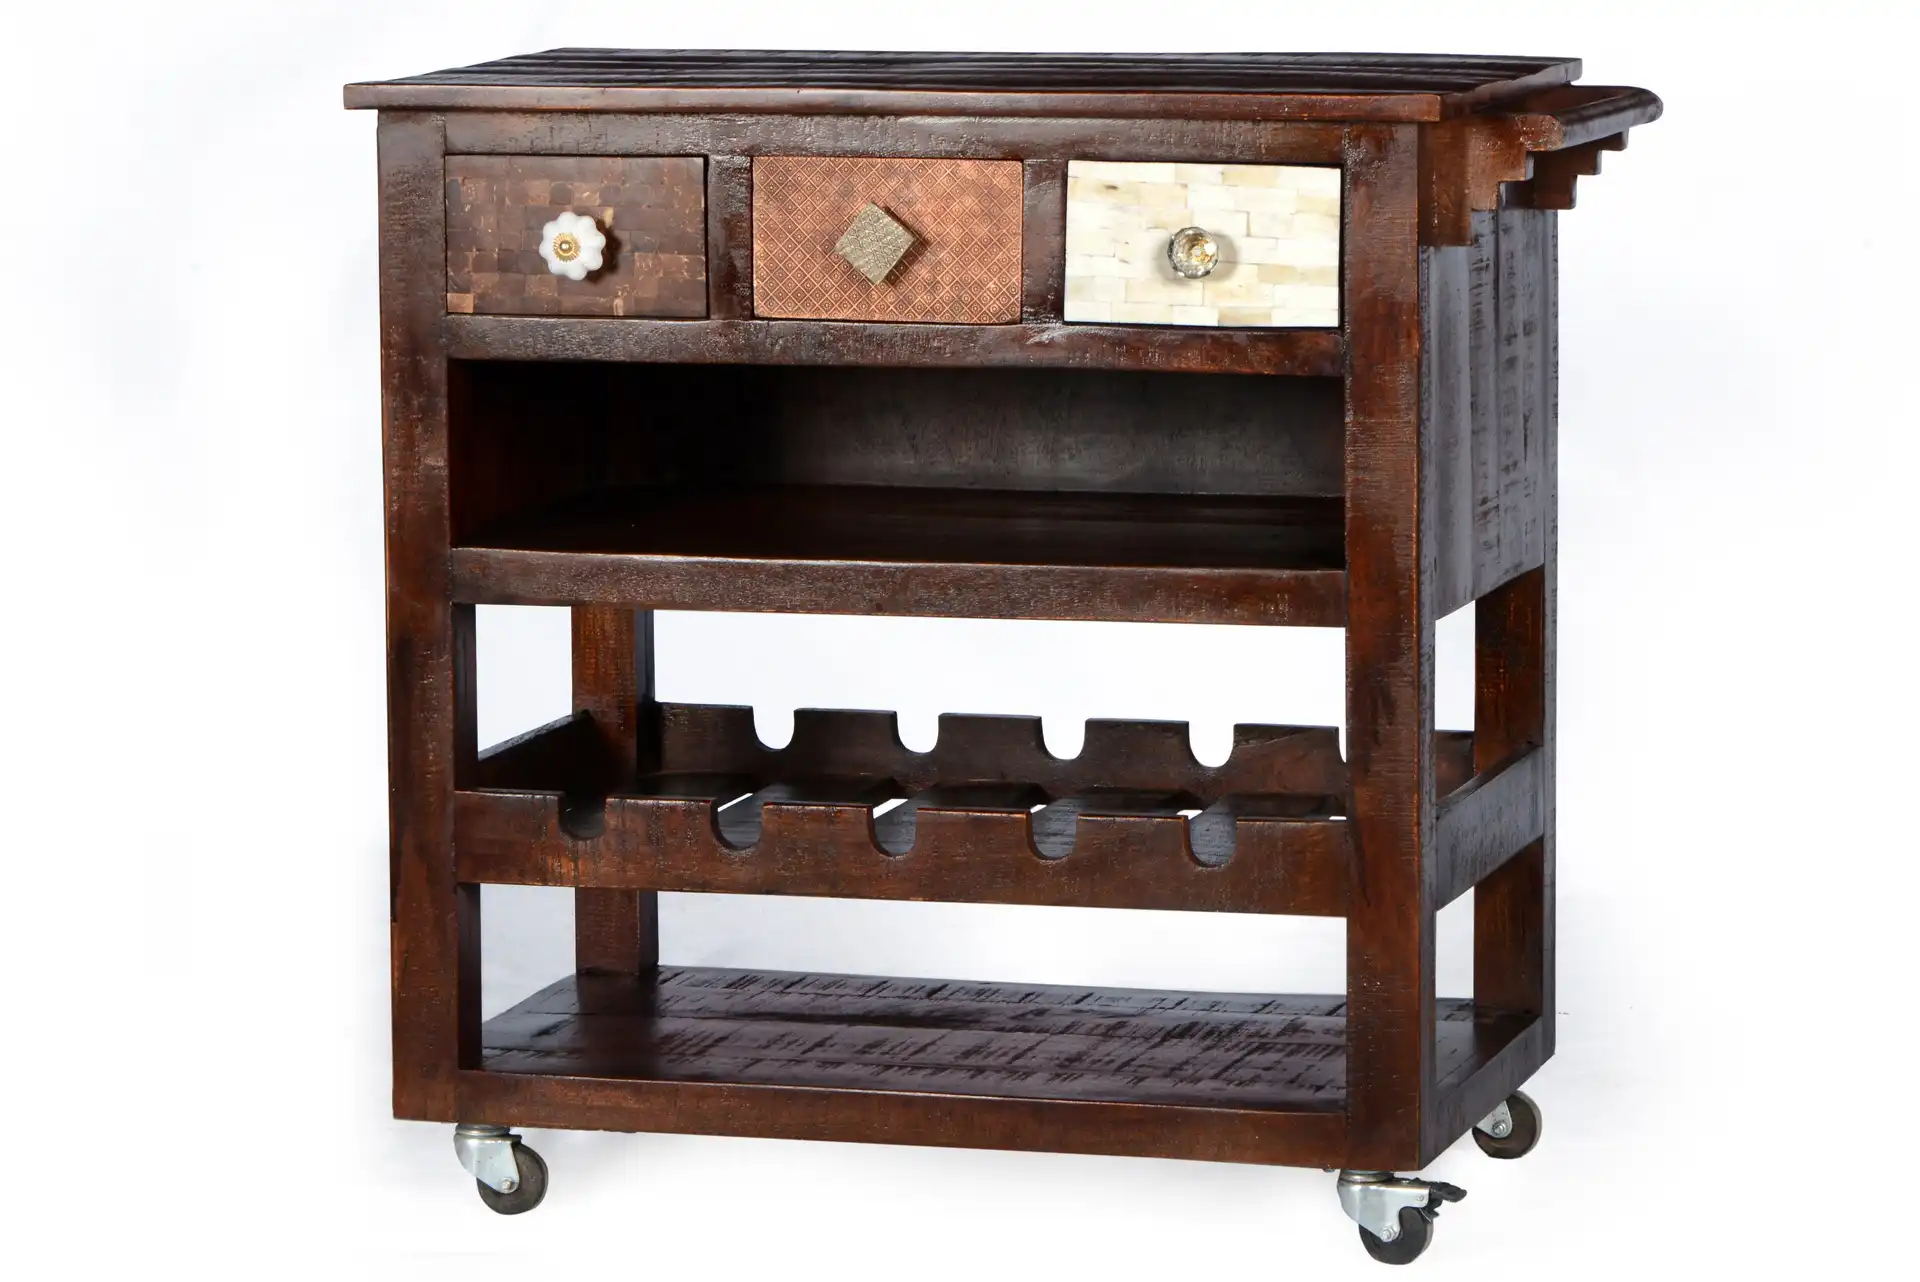 Wooden Kitchen Trolley with 3 Drawers, Winerack& on Wheels - popular handicrafts